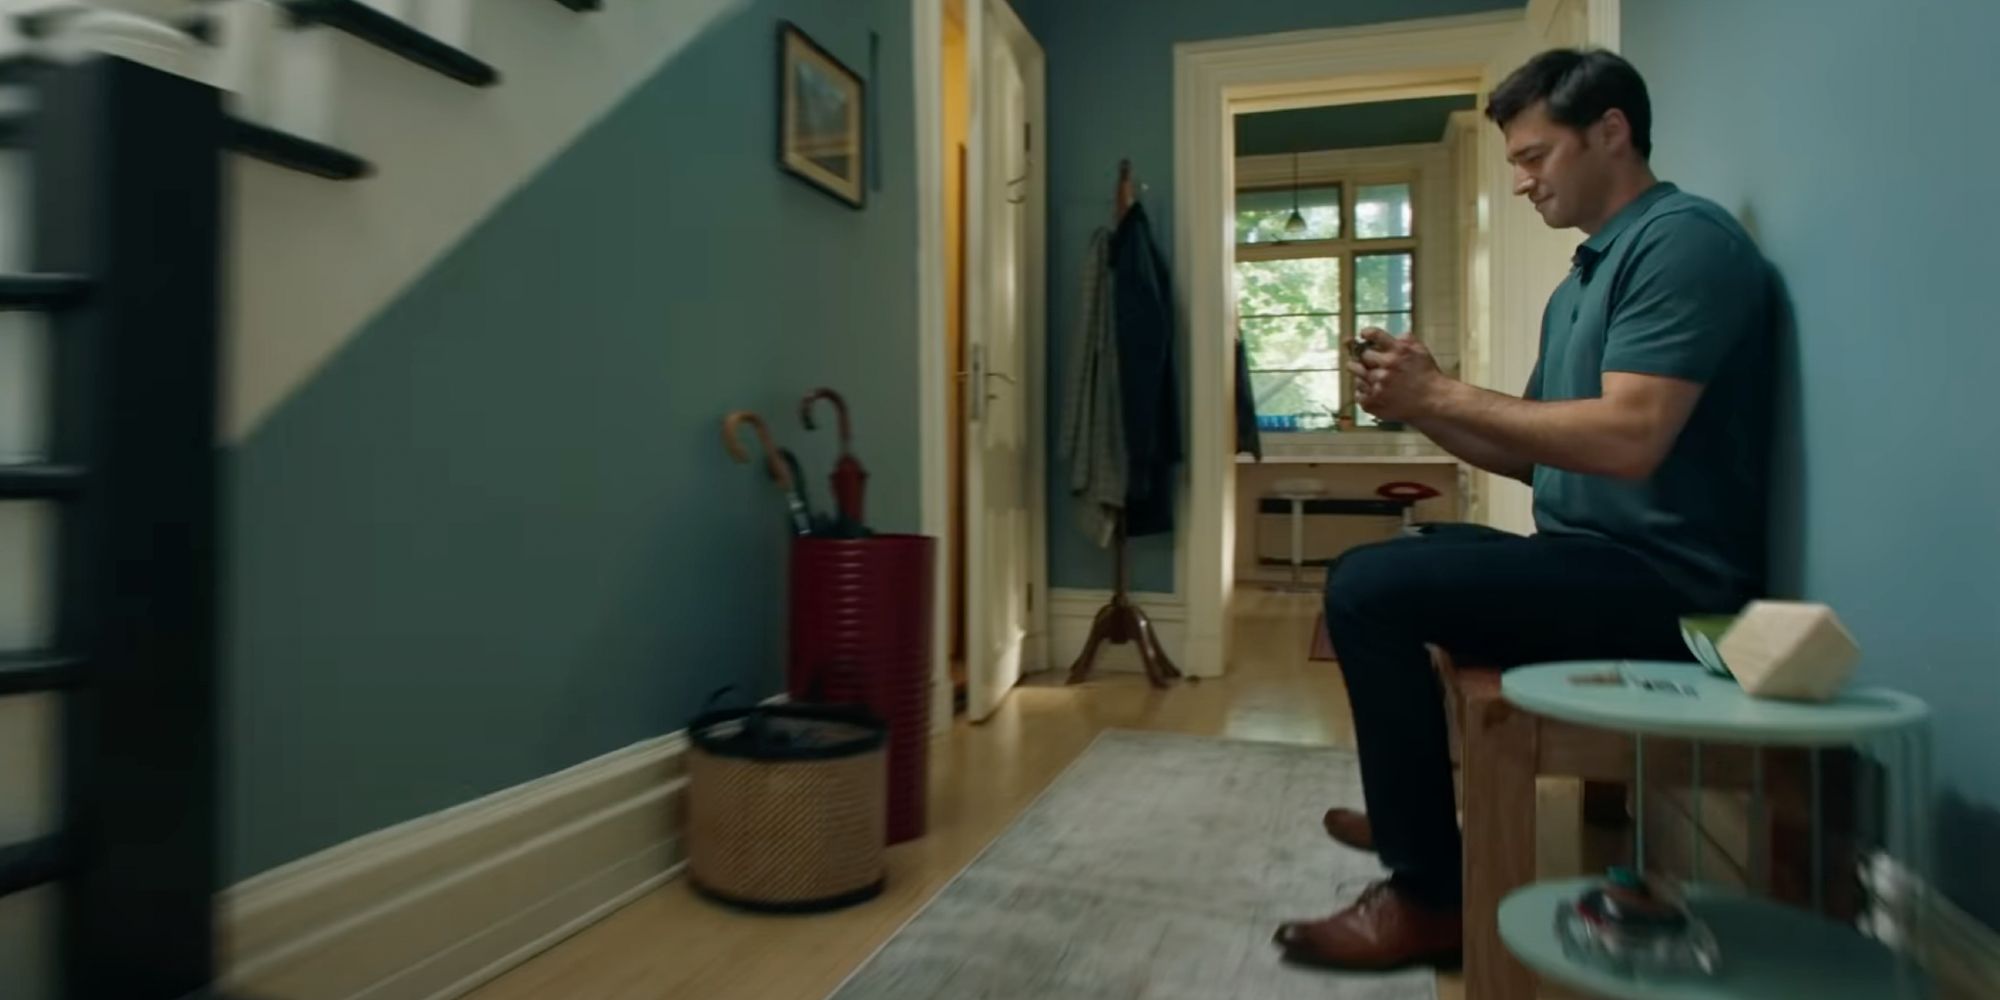 A Switch ad shows a man sitting in his entryway to play Switch